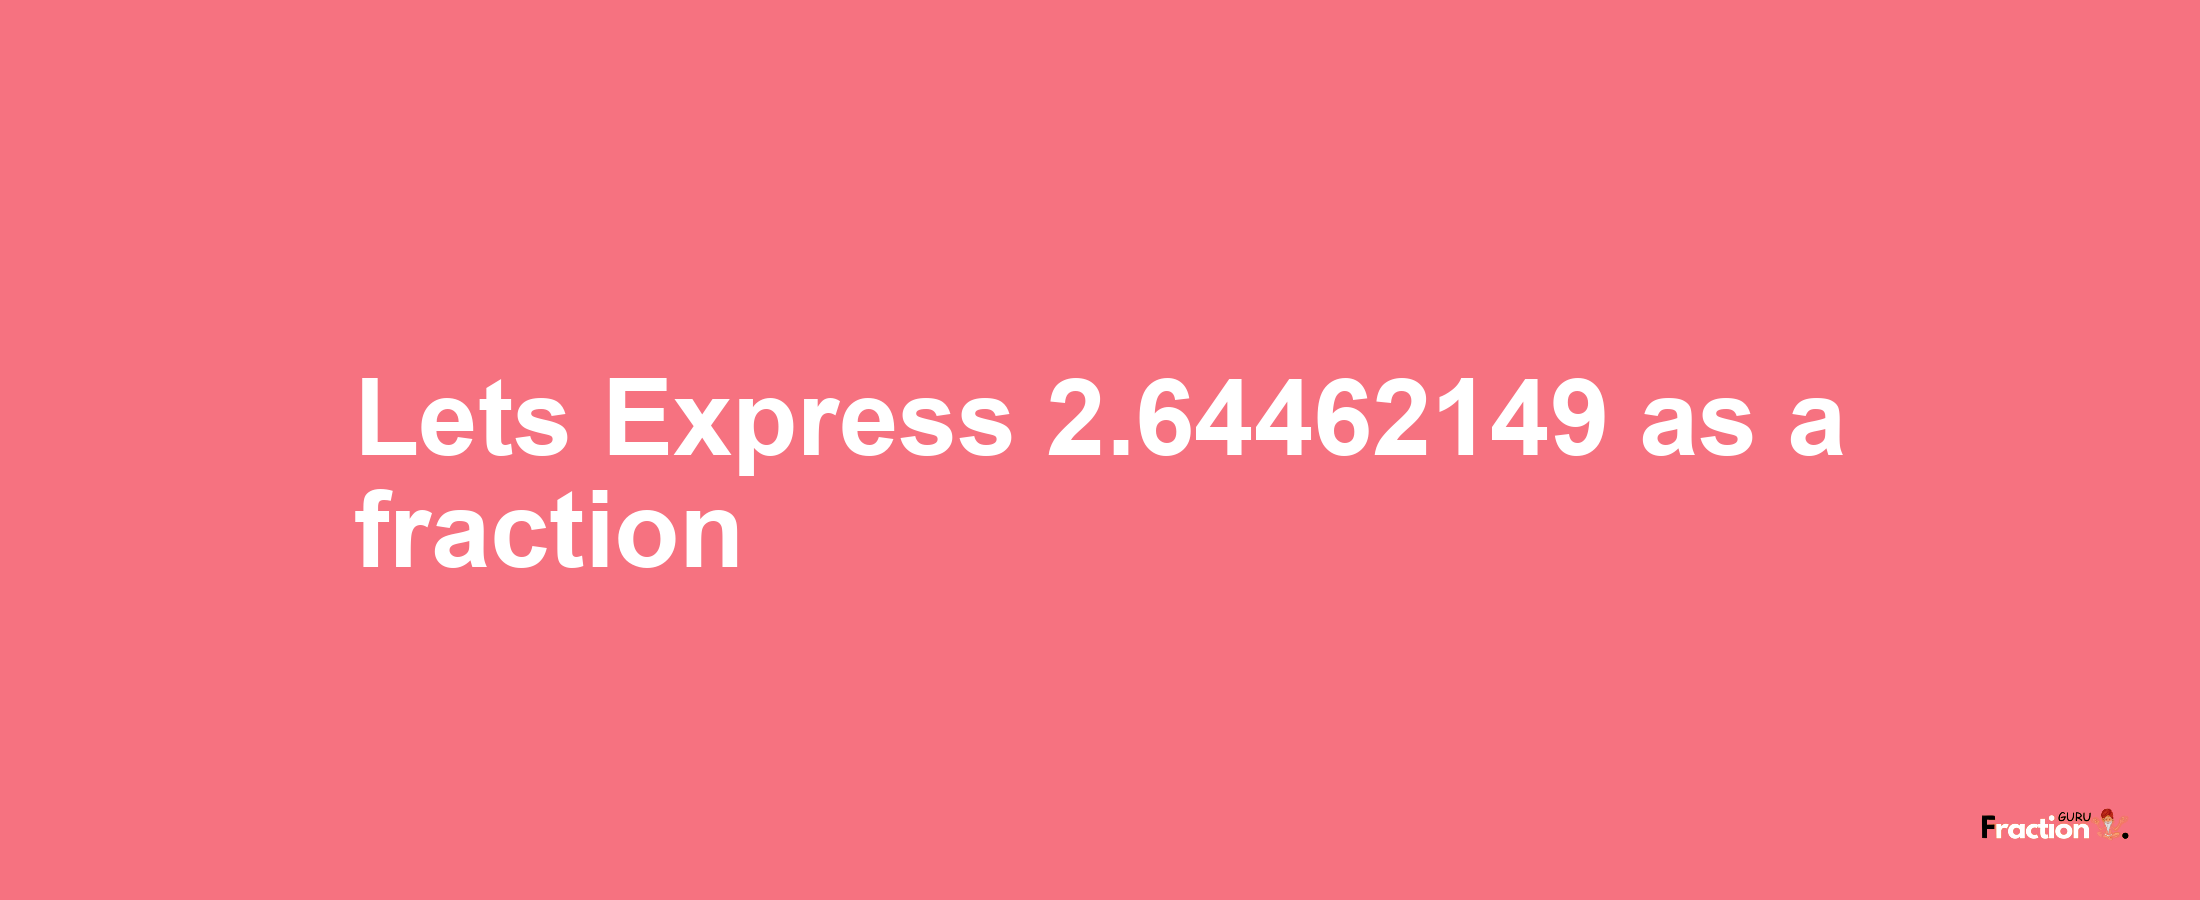 Lets Express 2.64462149 as afraction